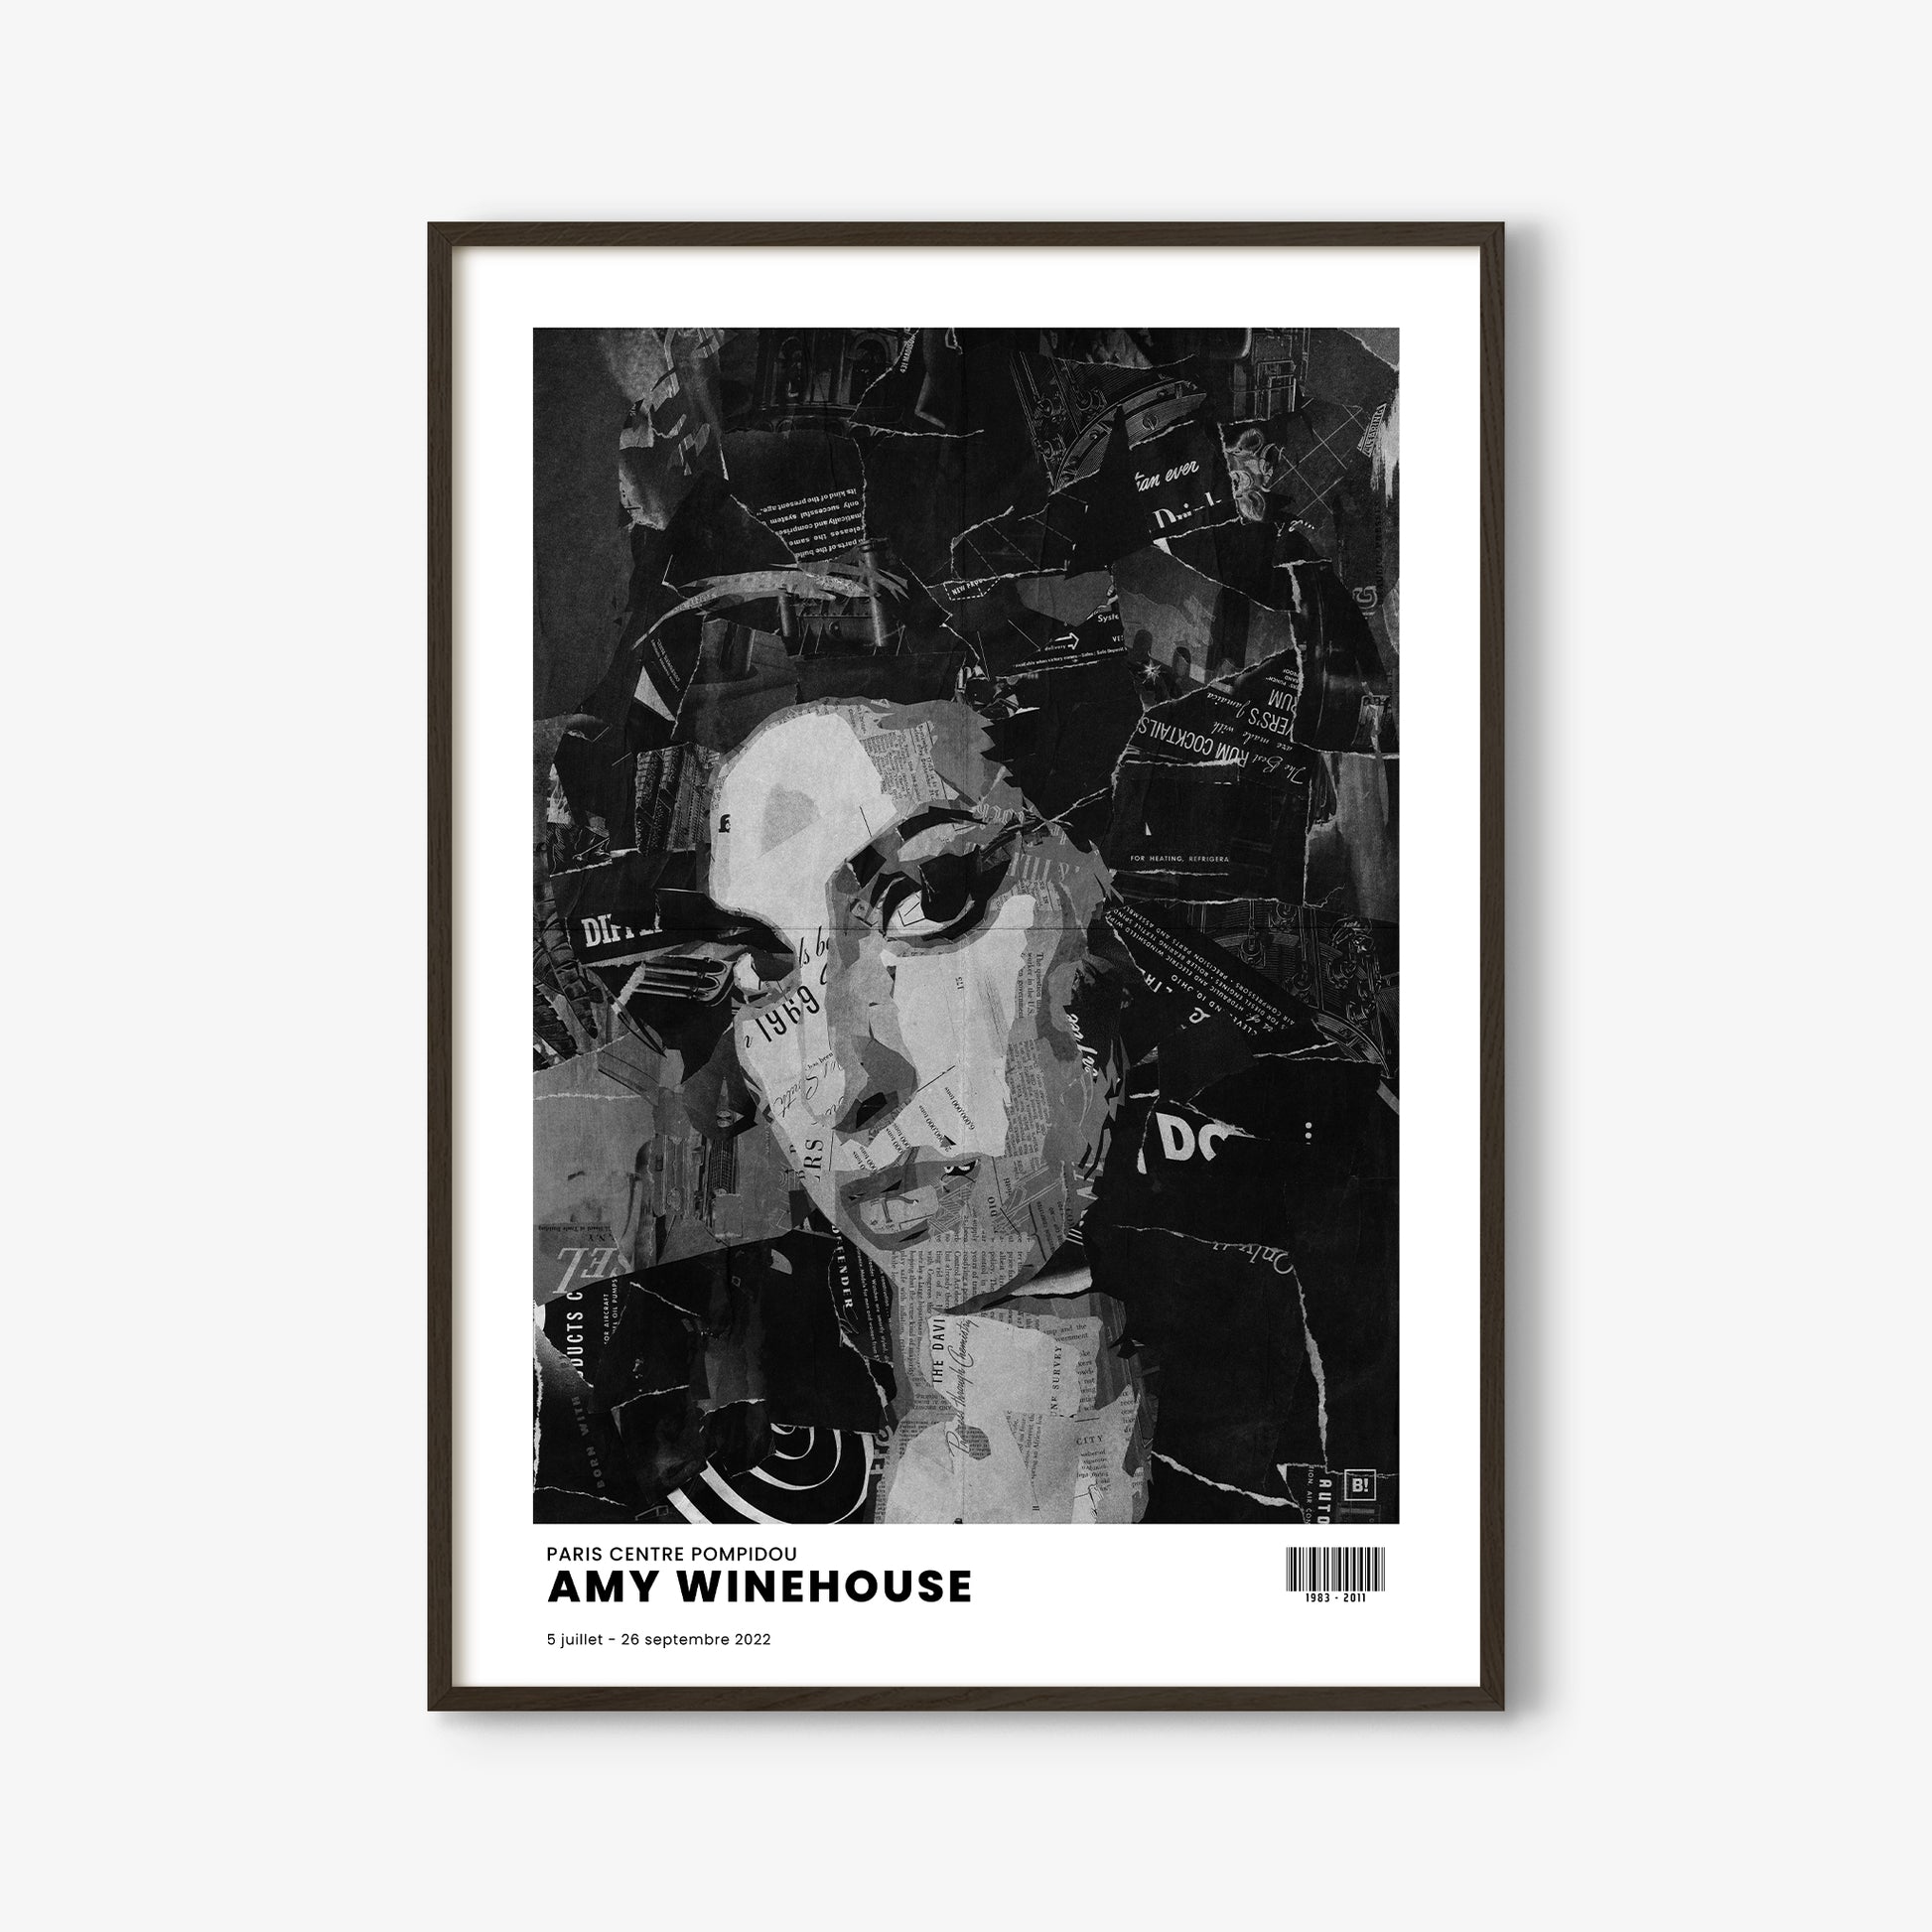 Be inspired by Iconic Amy Winehouse Paris Centre Pompidou Exhibition Art Print. The artwork is presented in a black oak frame that captures its timeless beauty in every detail.